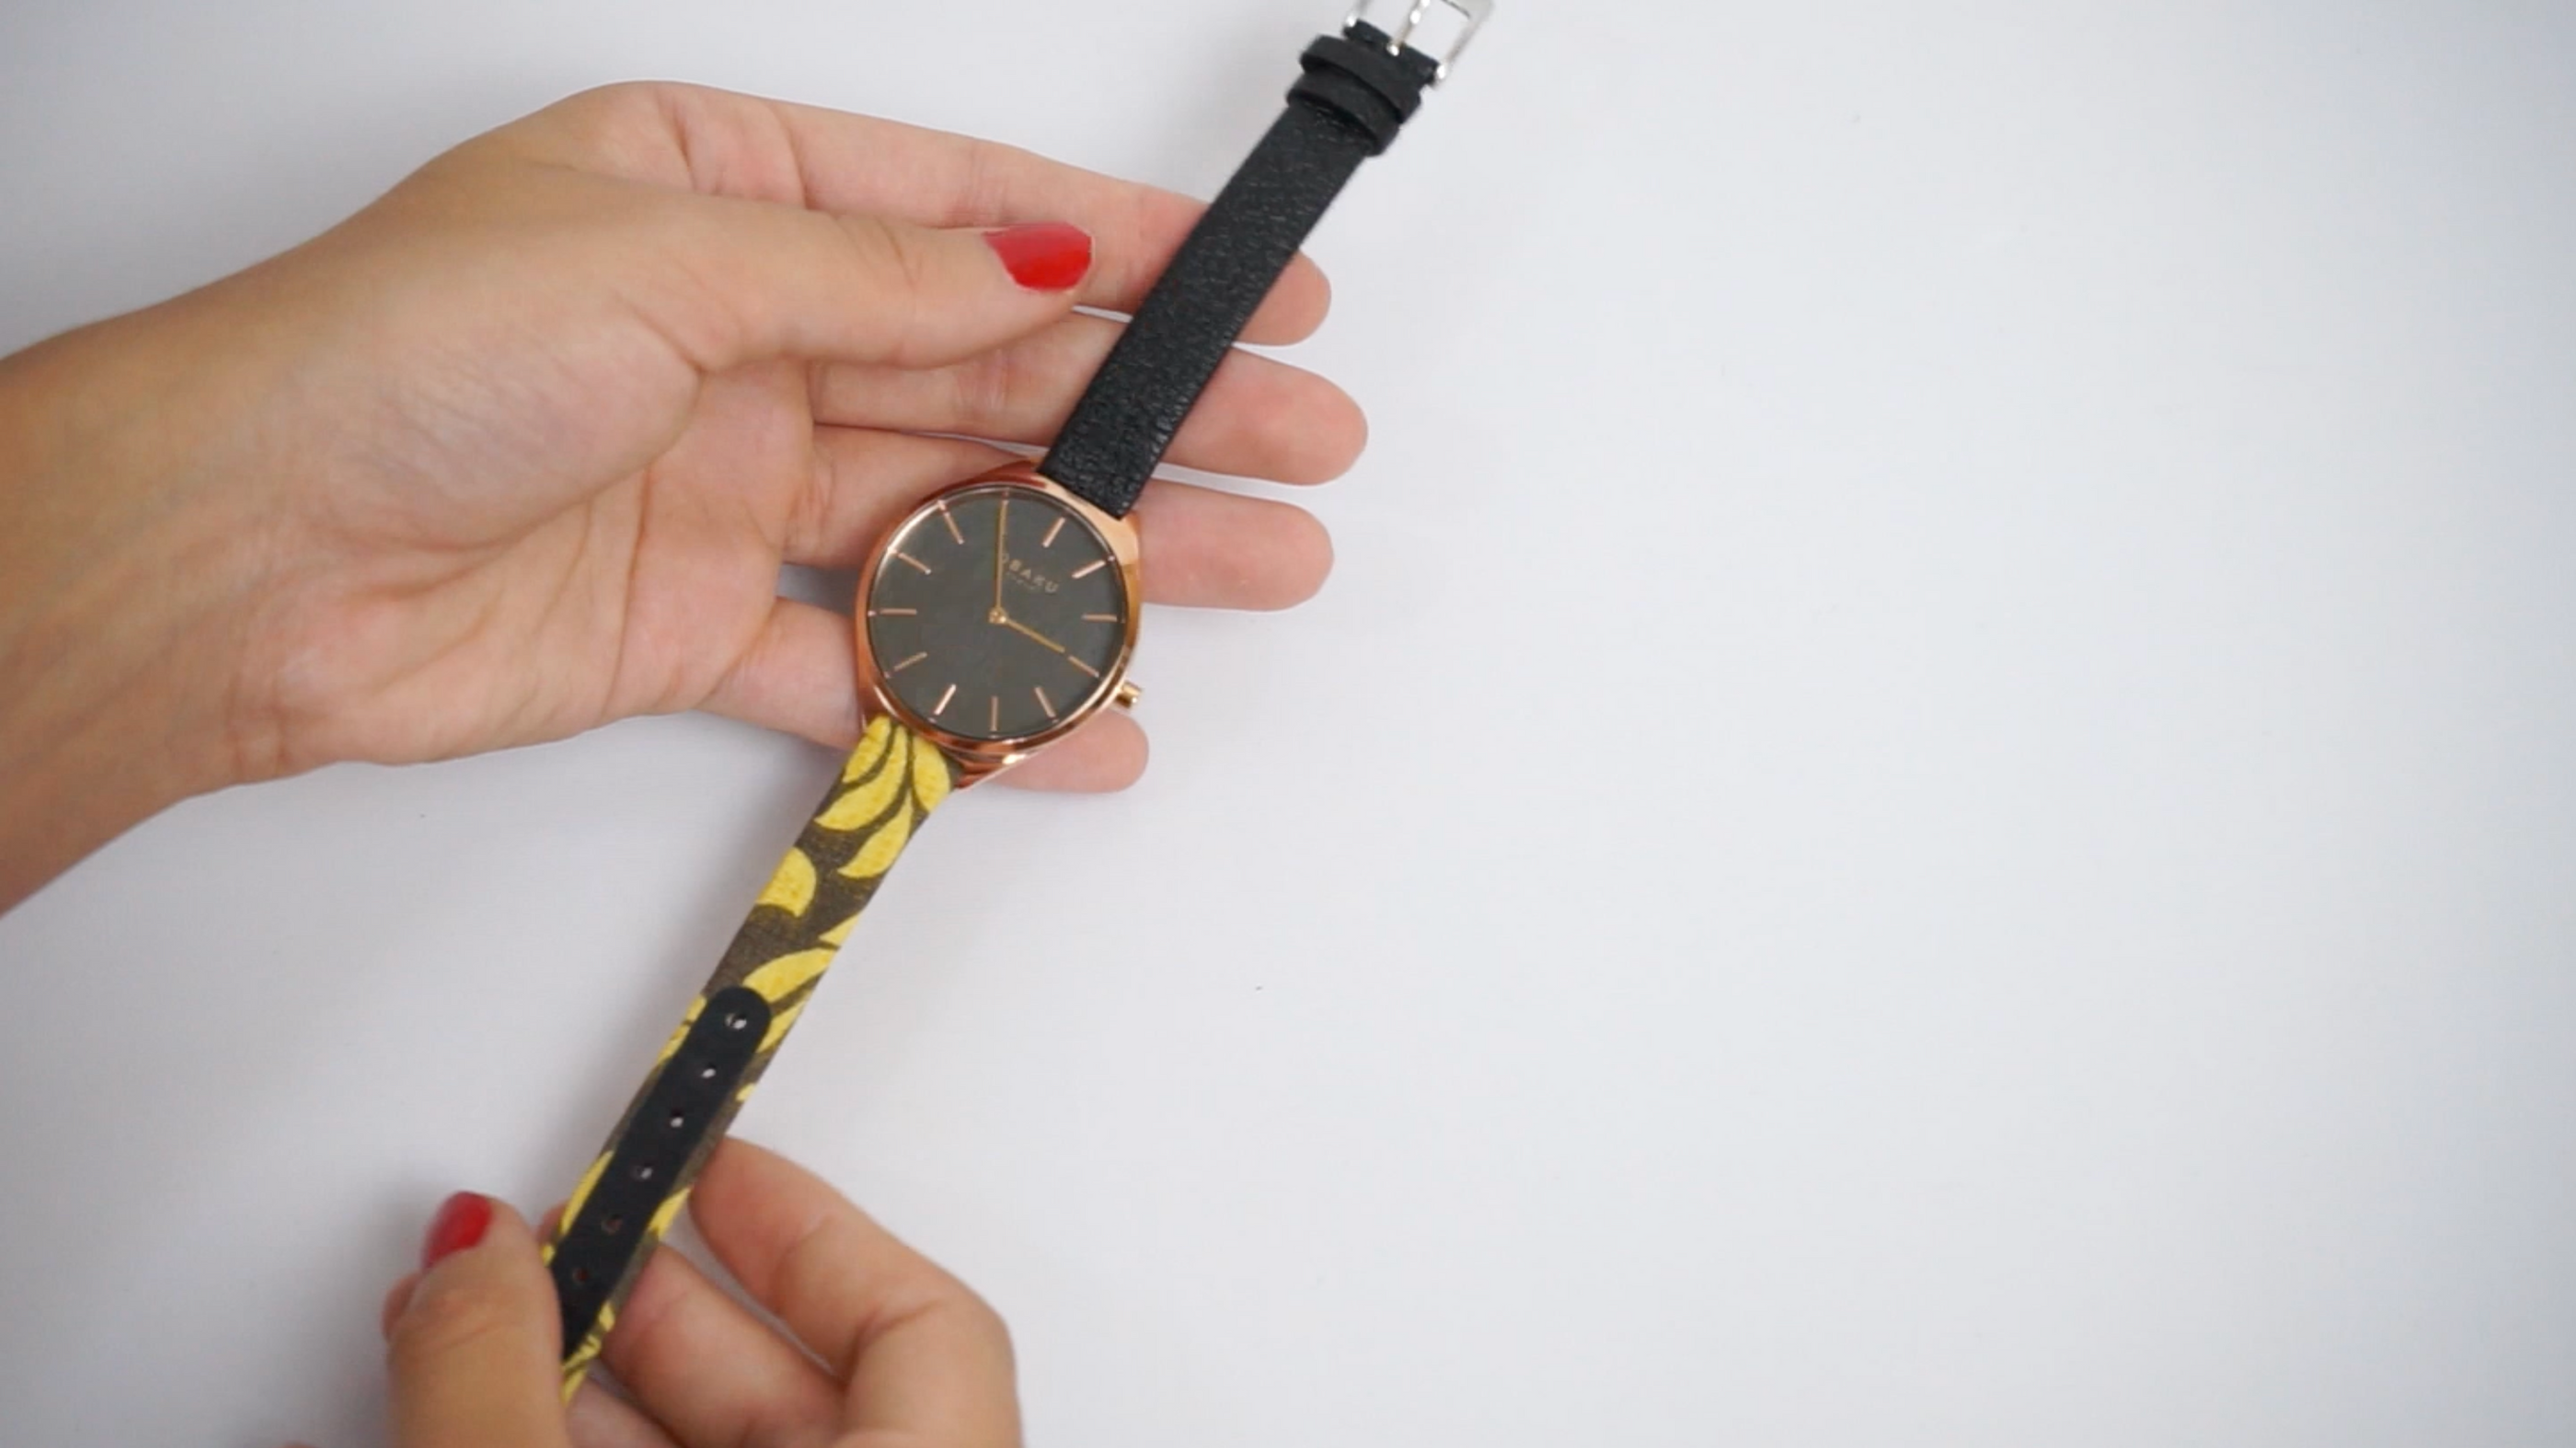 How to change the strap of your watch